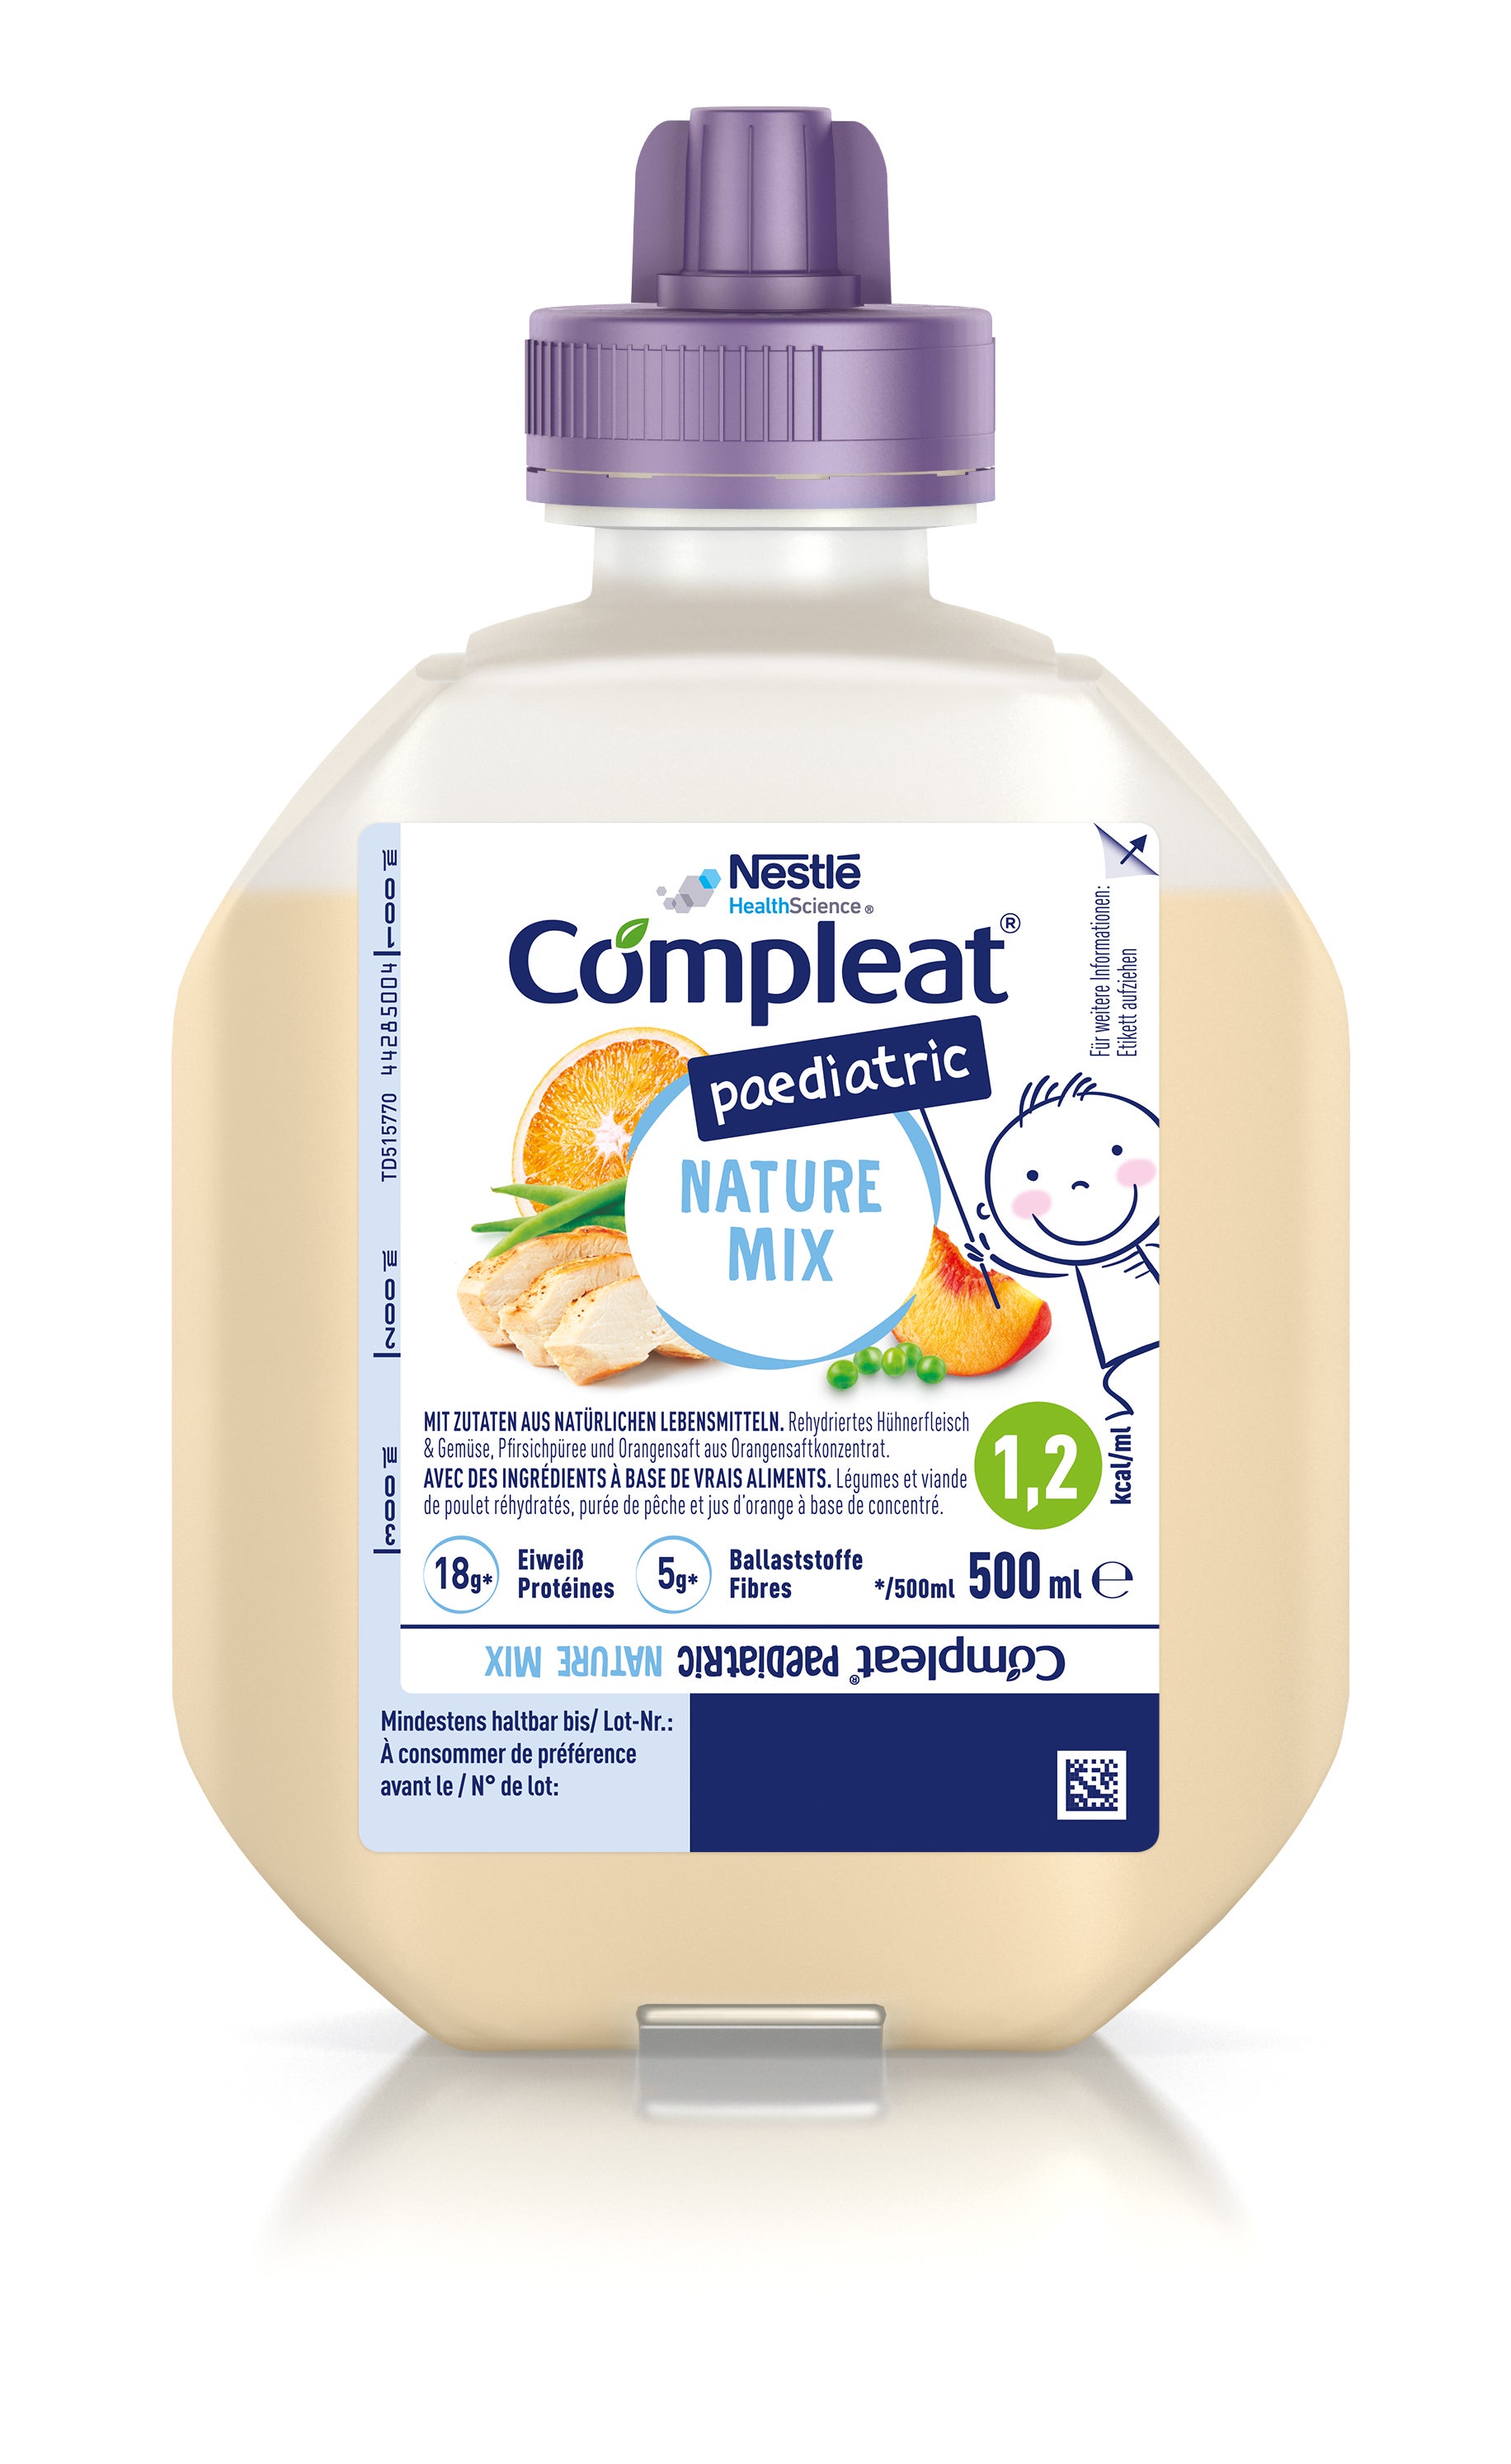 Compleat Paediatric Nature Mix